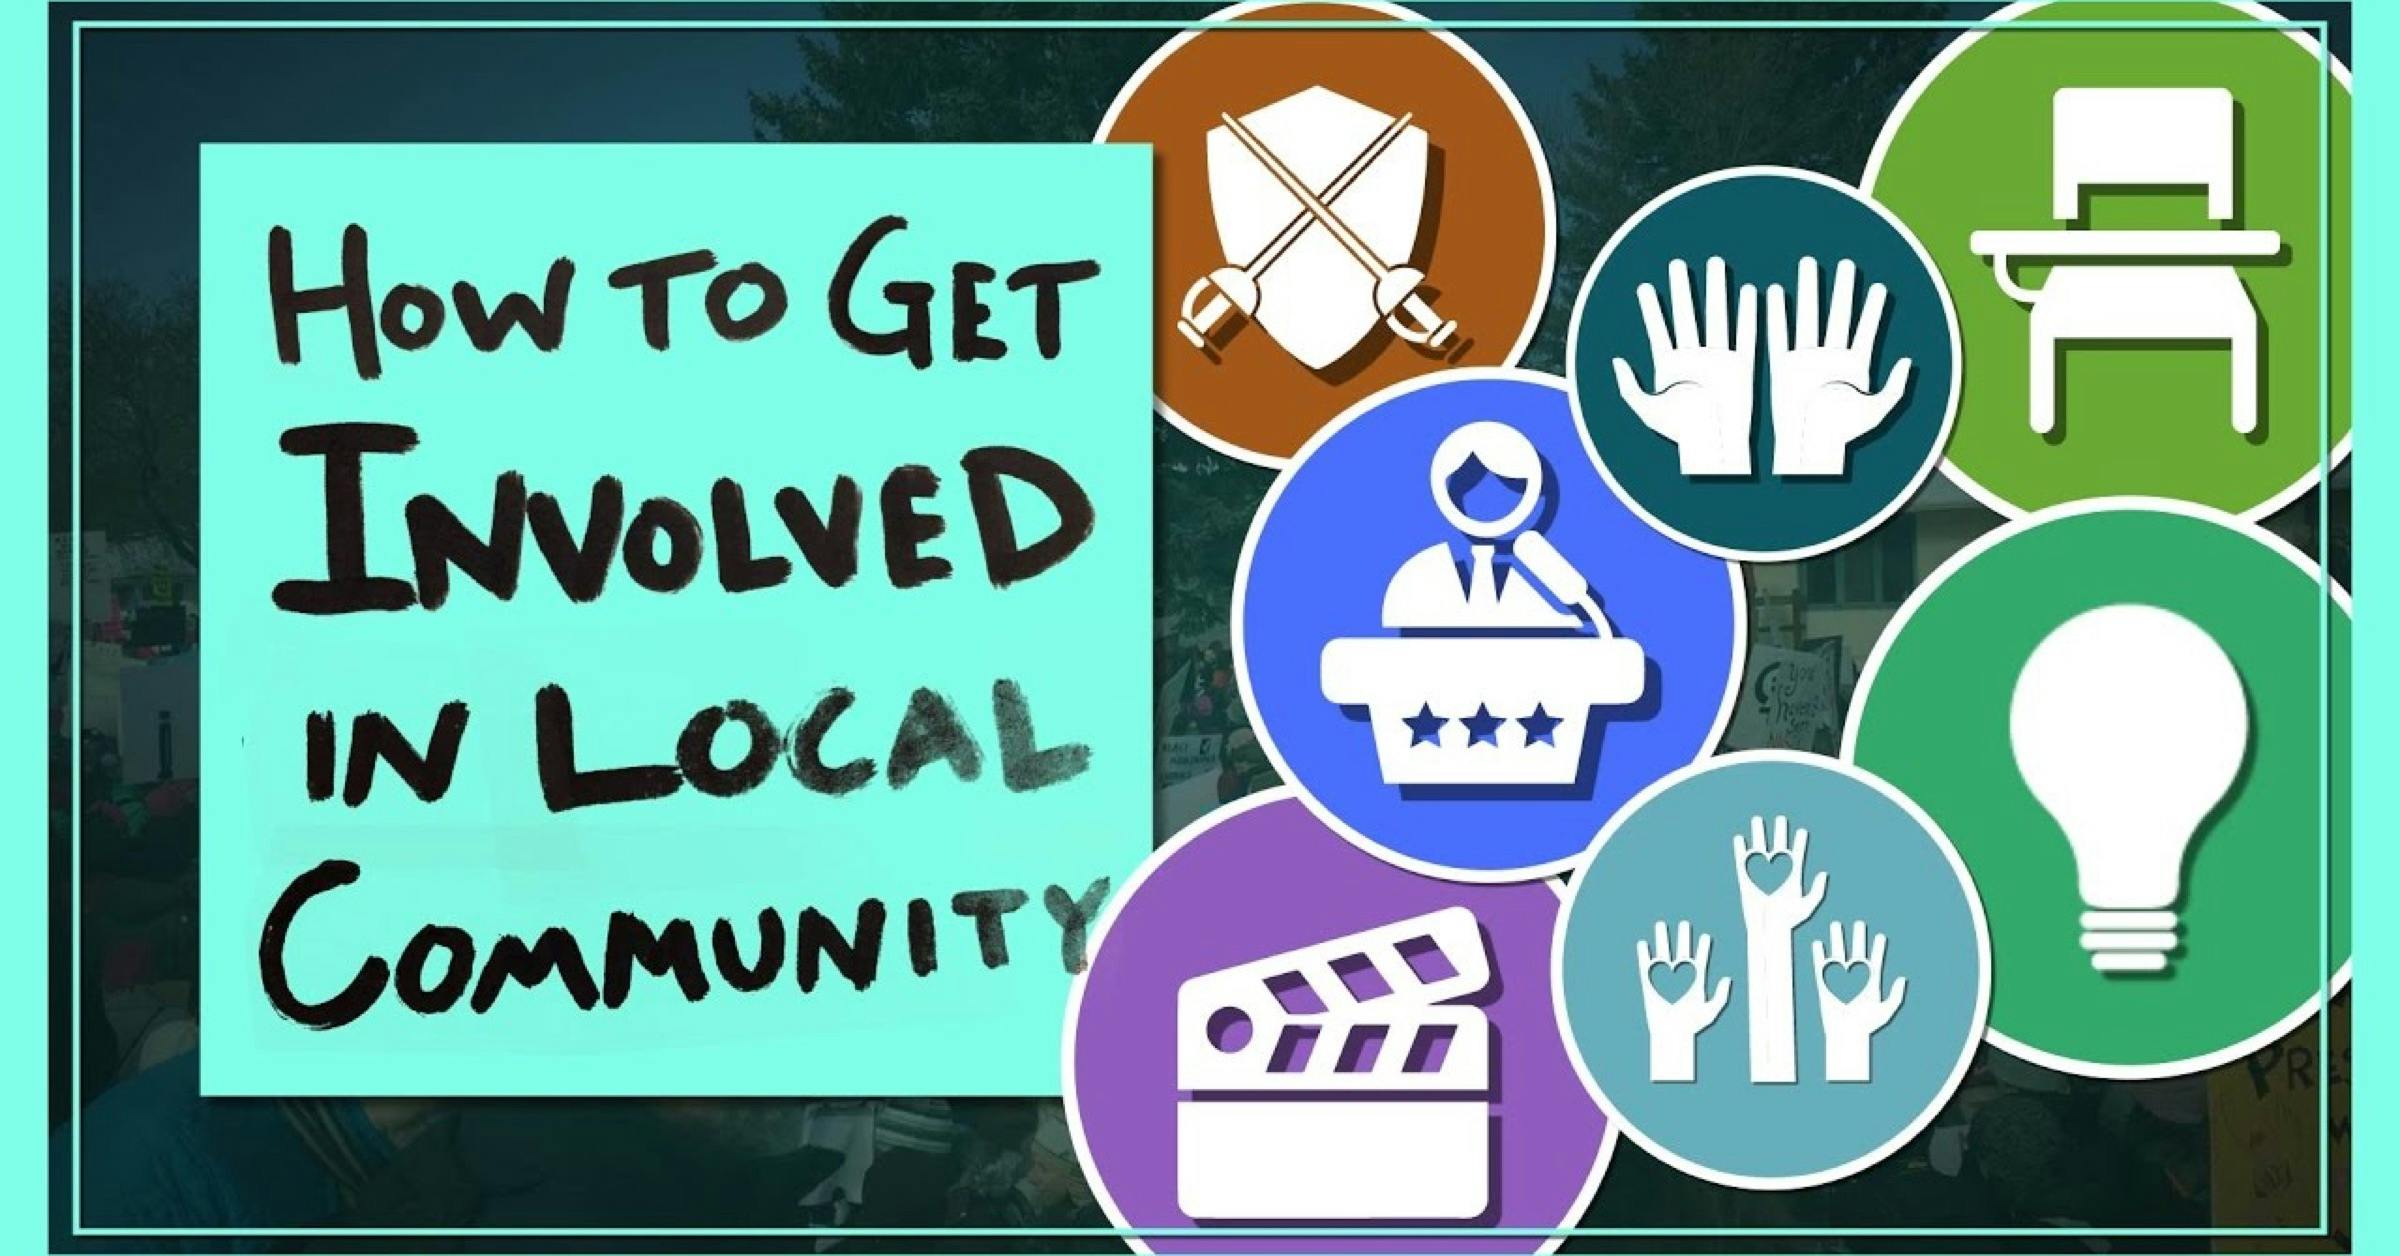 Connecting with your local community